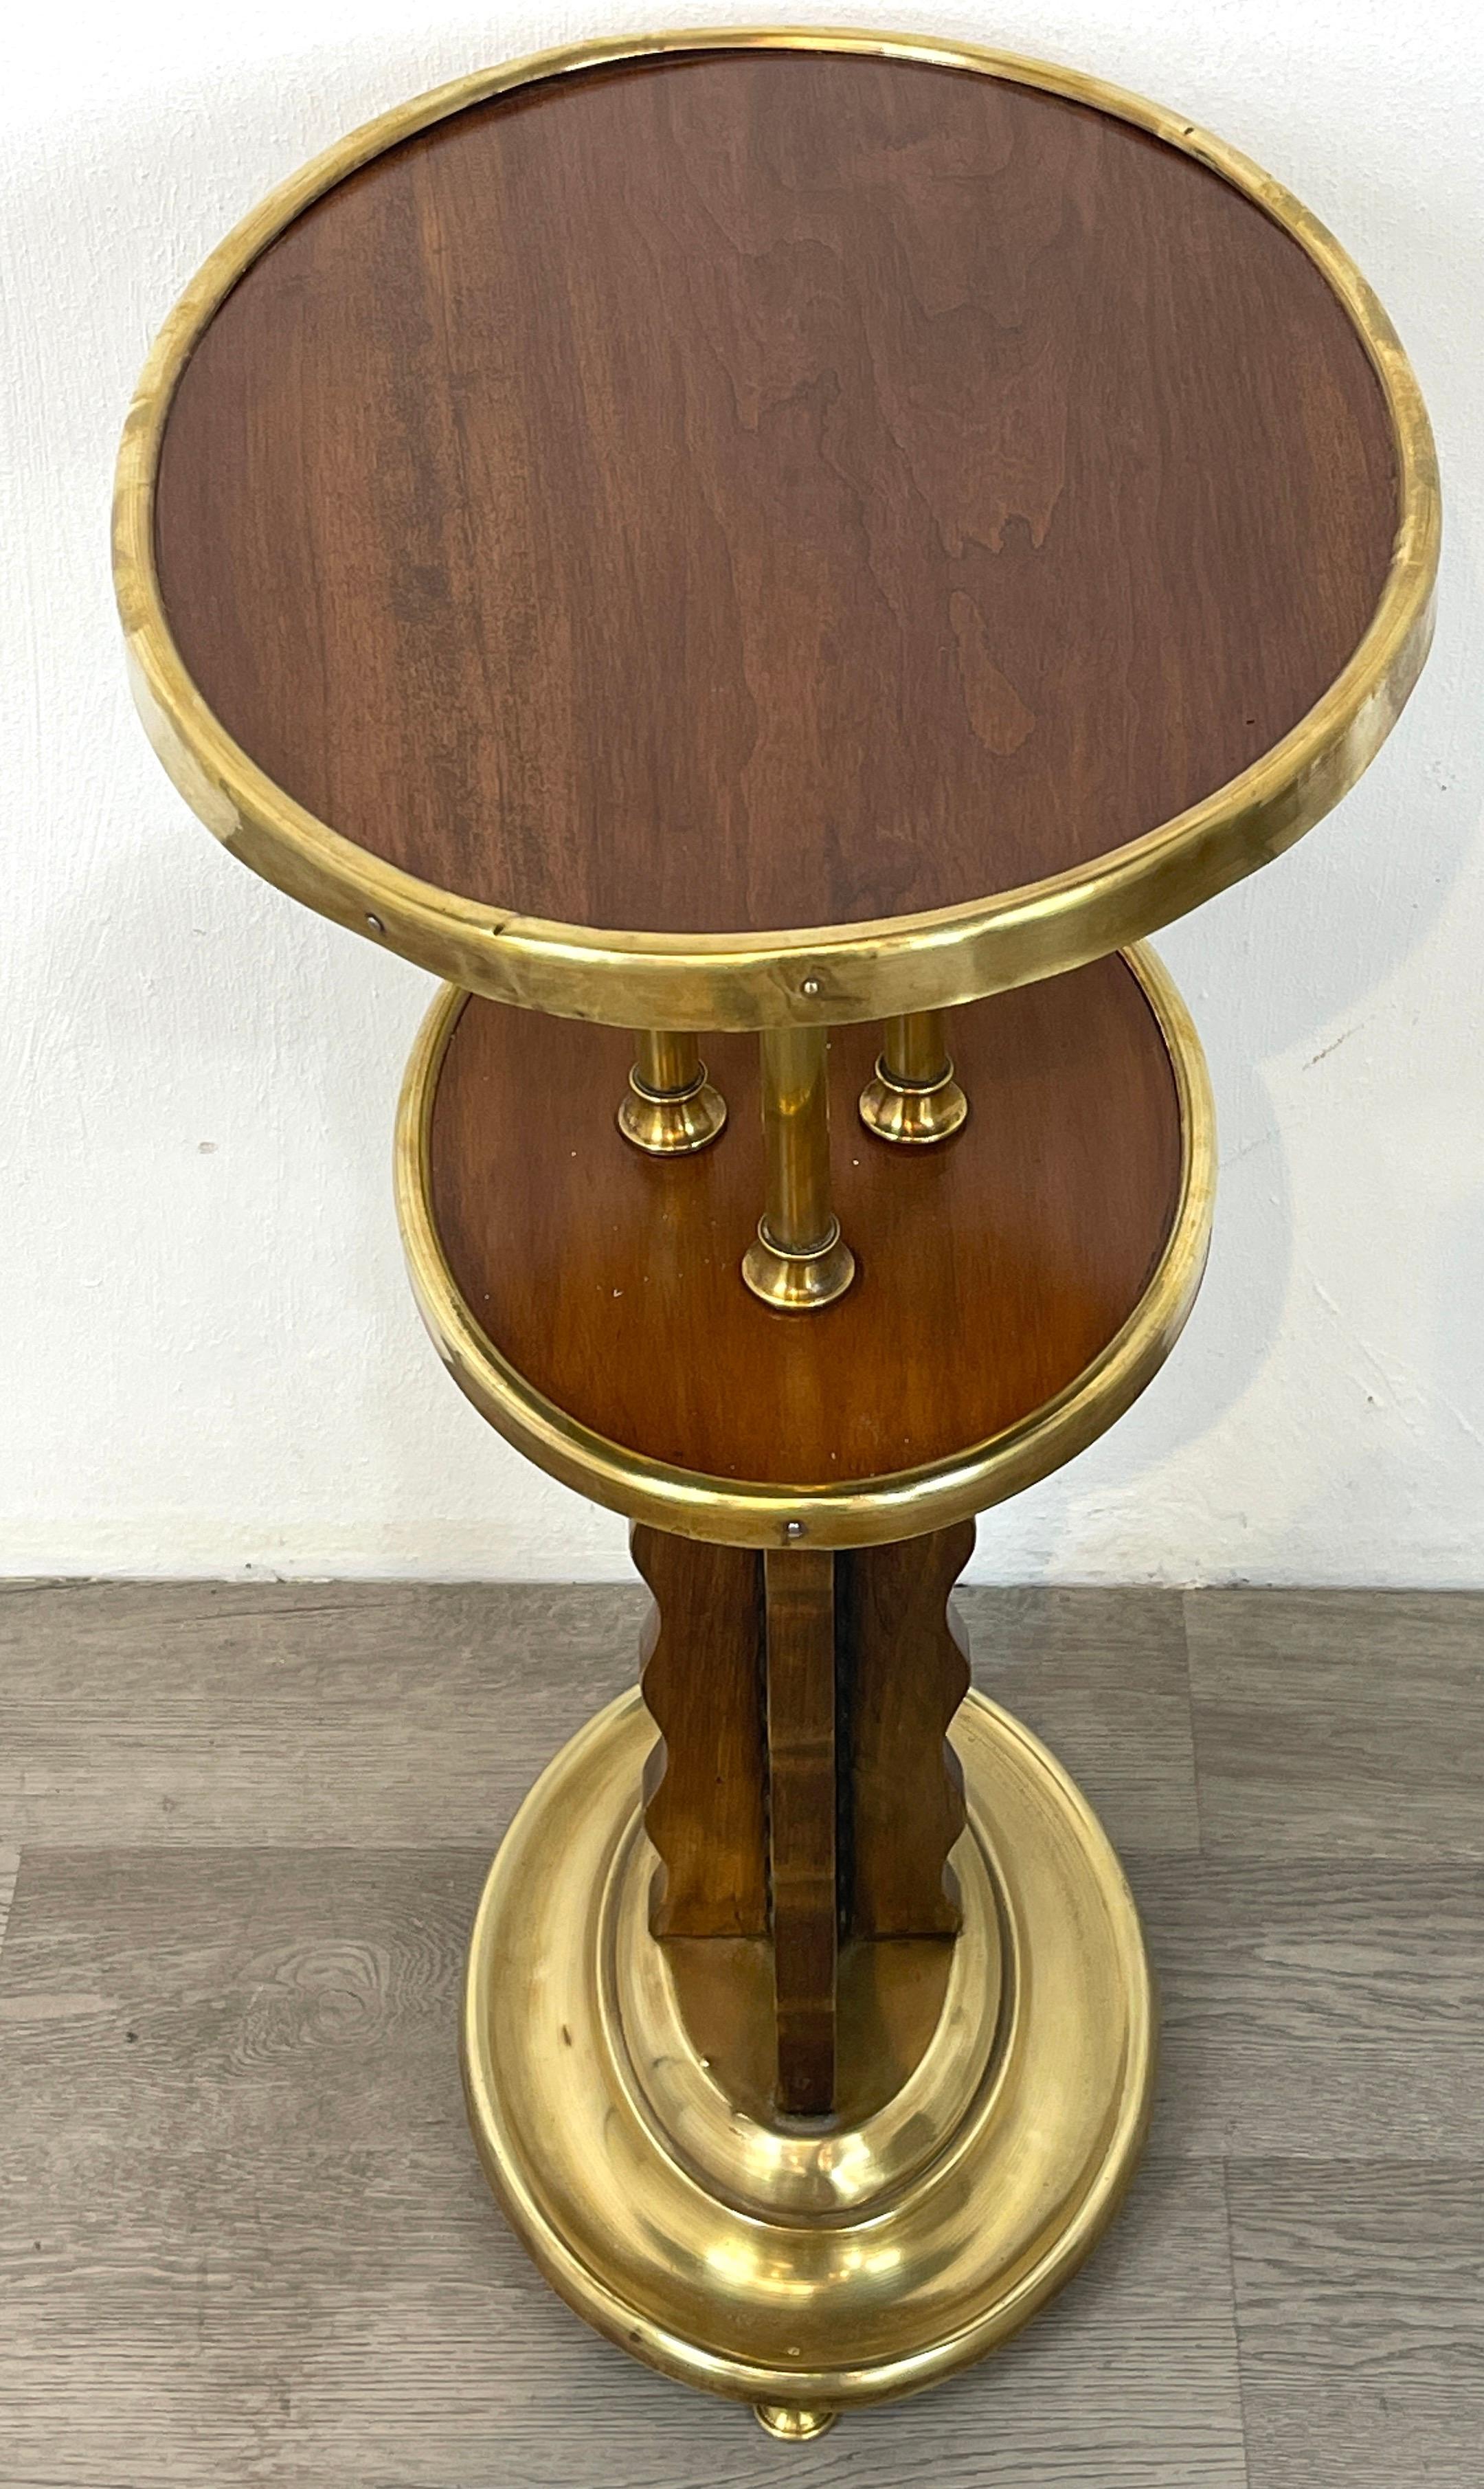 Early 20th Century Viennese Secession Brass Mounted Hardwood Side Table, Austria C. 1920 For Sale